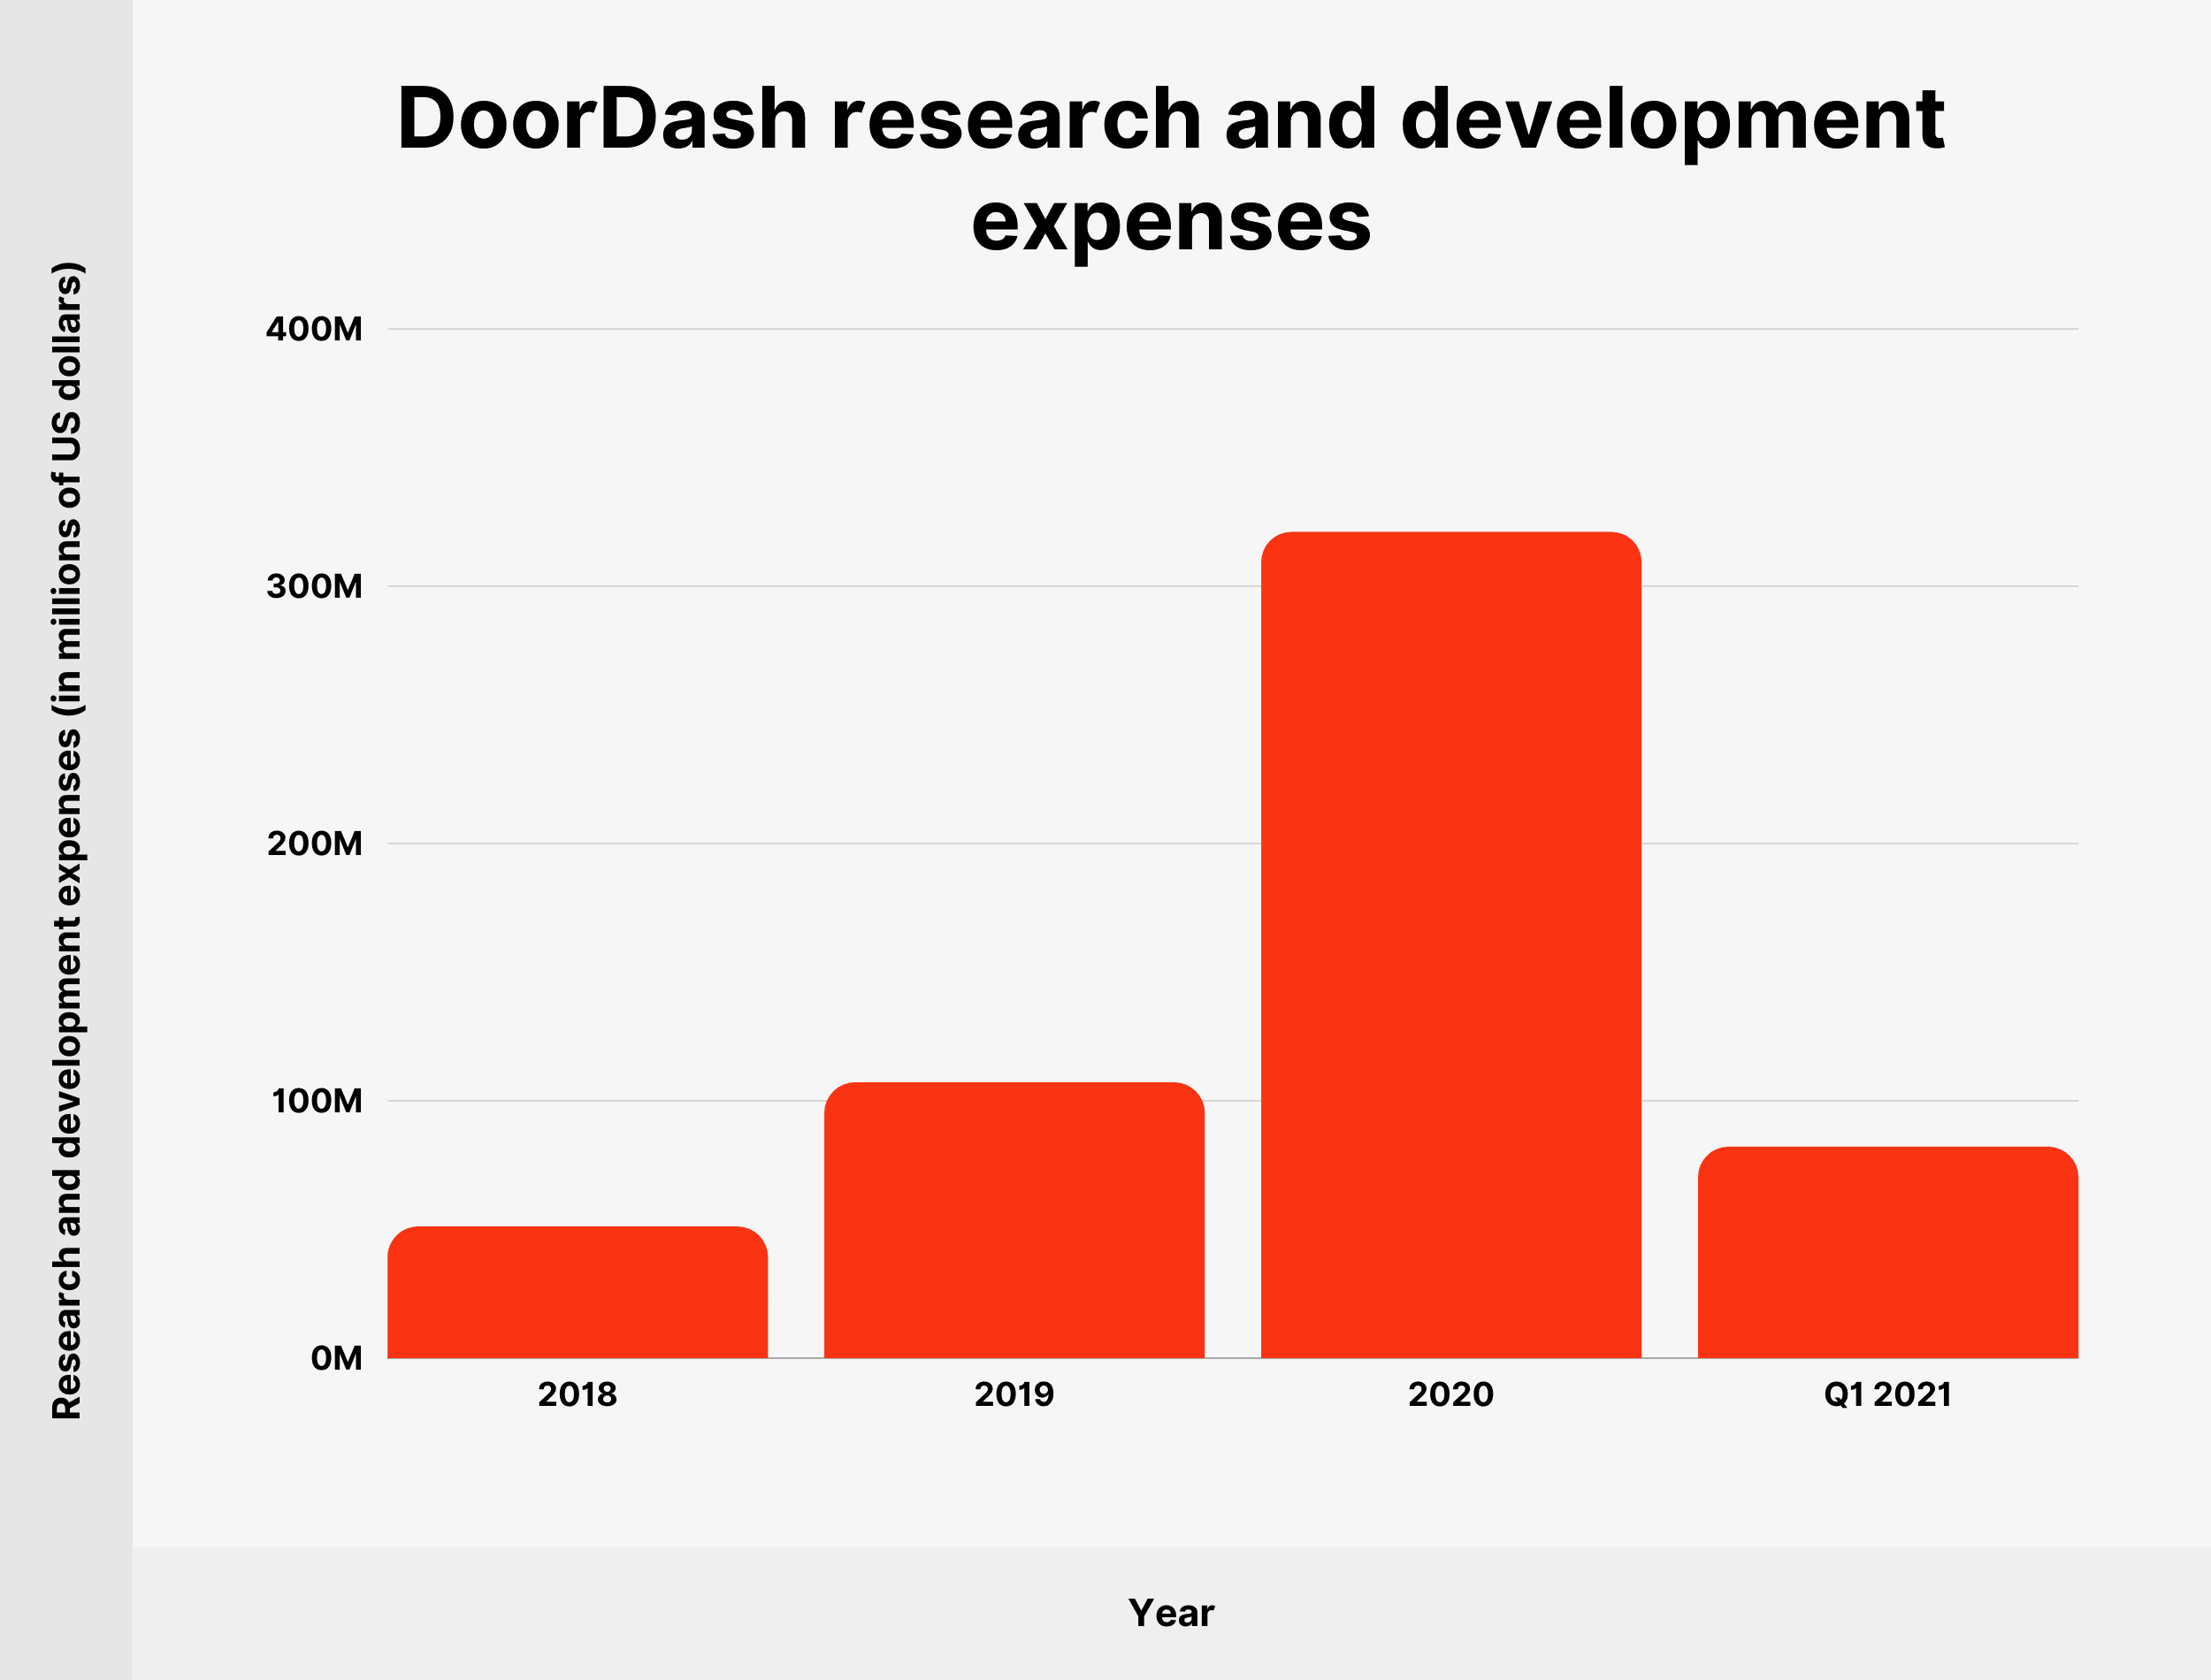 DoorDash research and development expenses